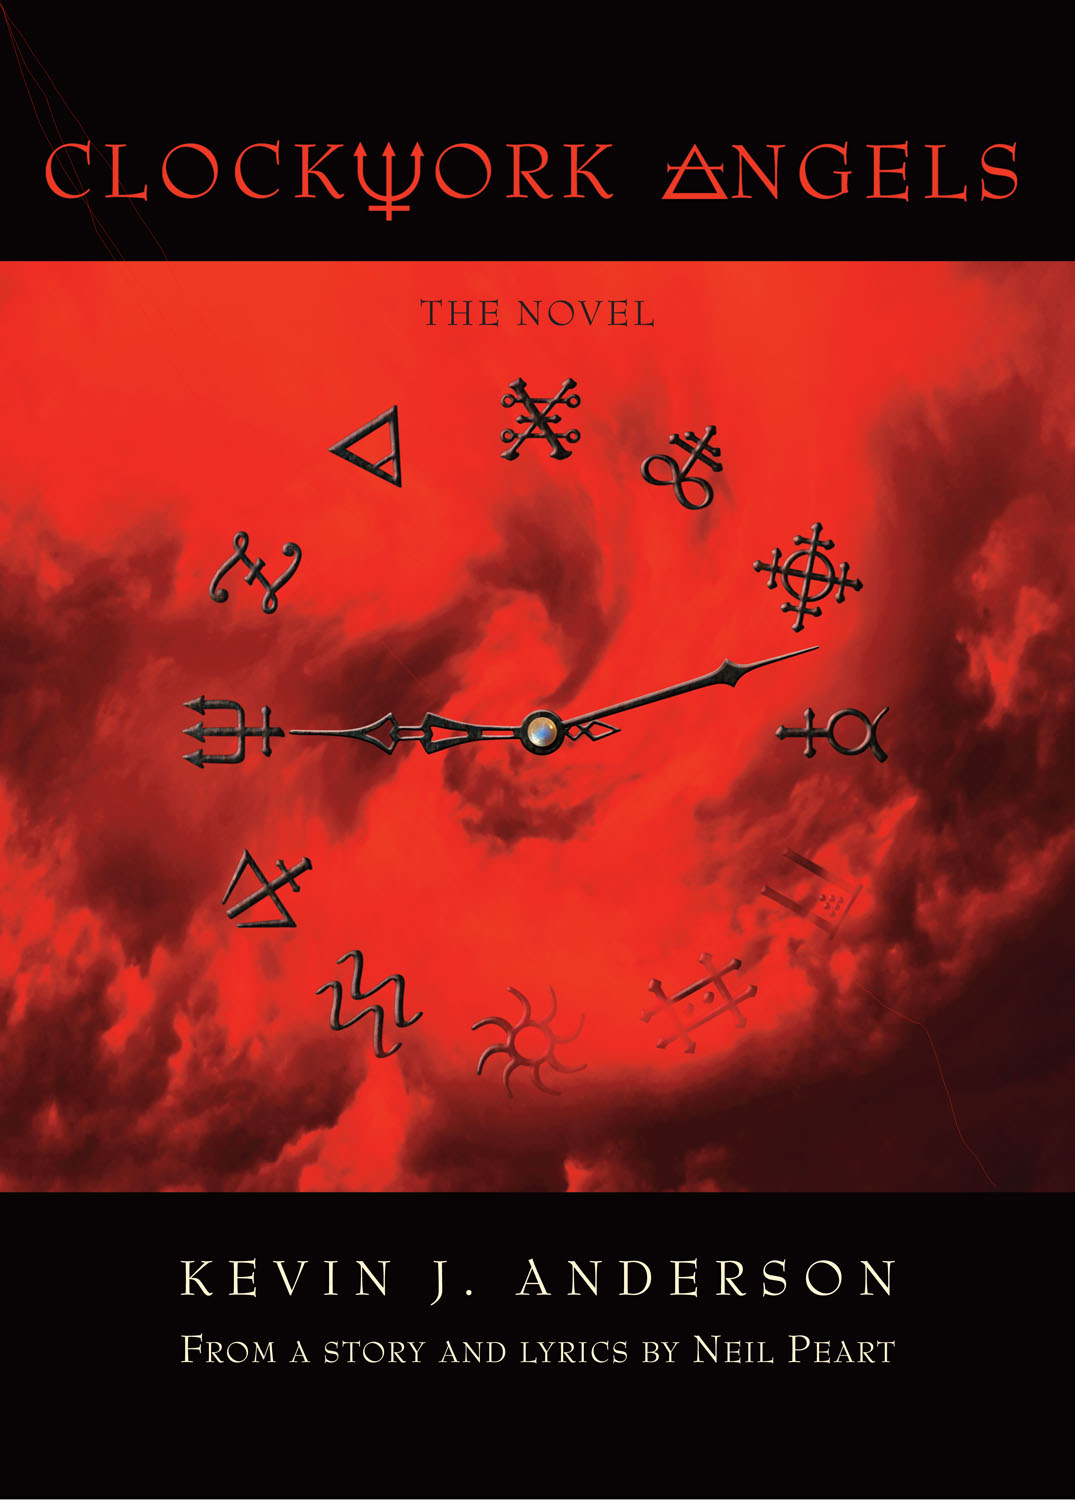 Announcing CLOCKWORK LIVES by Kevin J. Anderson and Neil Peart